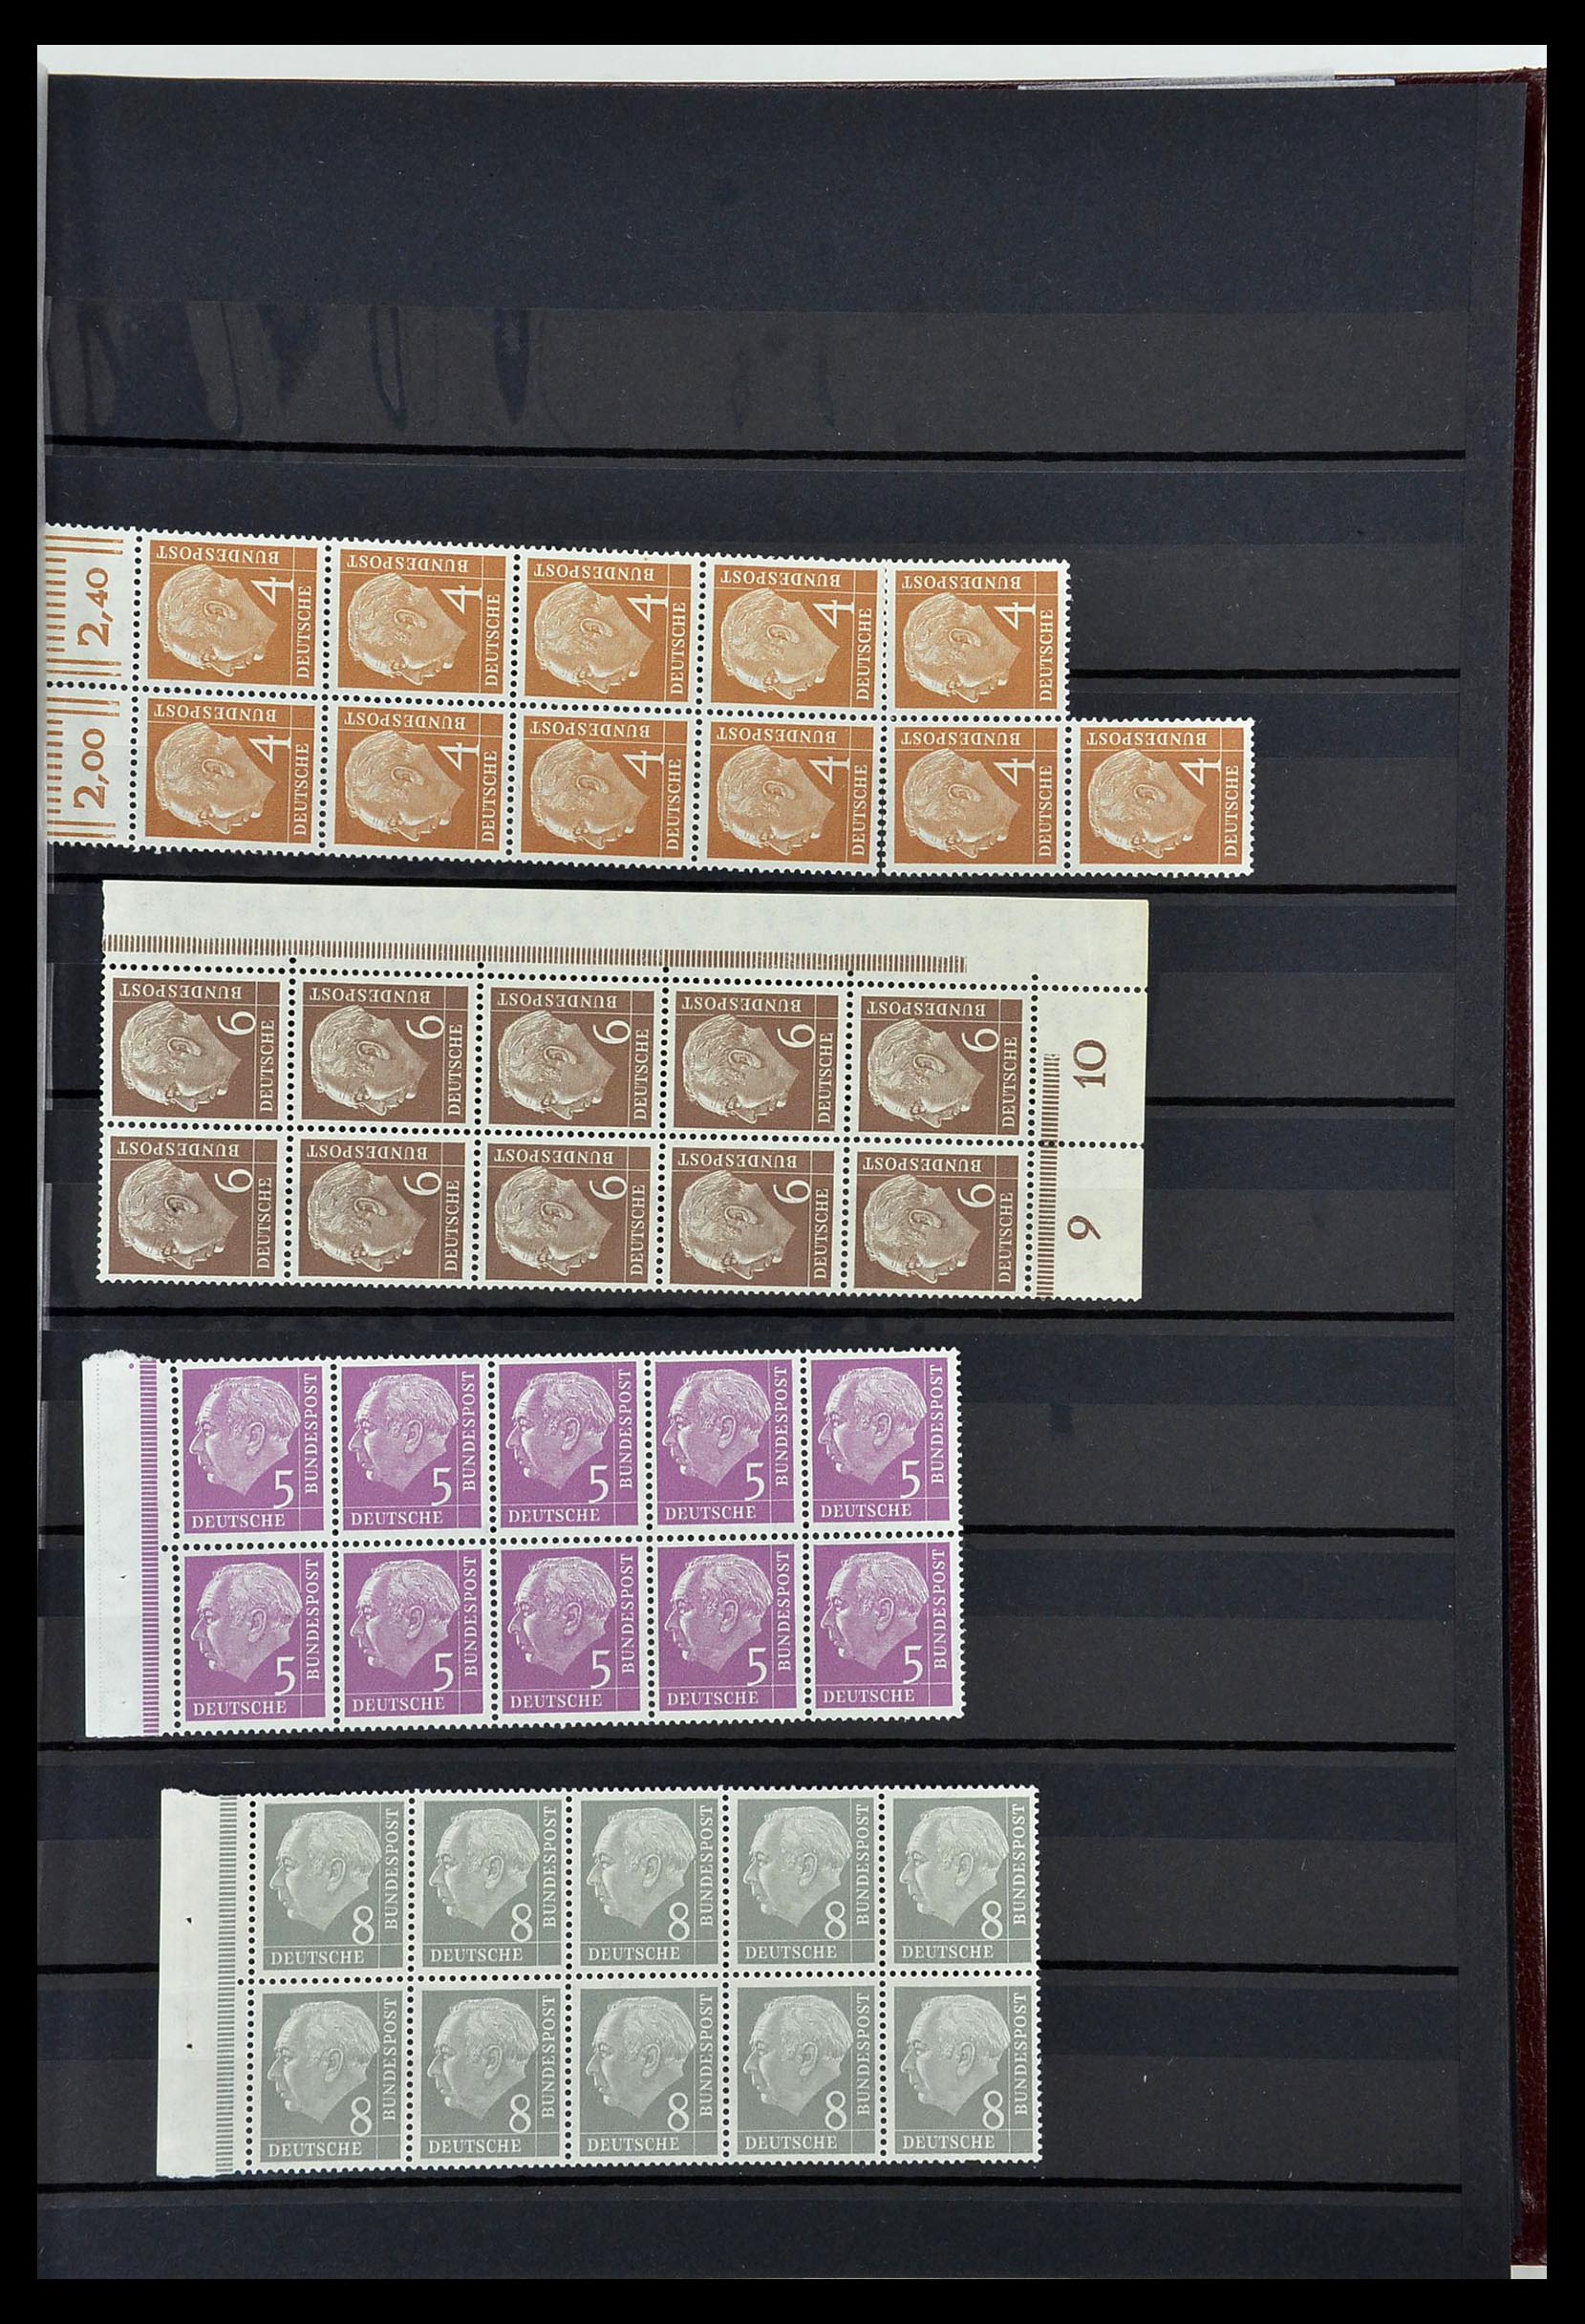 34003 040 - Stamp collection 34003 Bundespost combinations 1950-2020.